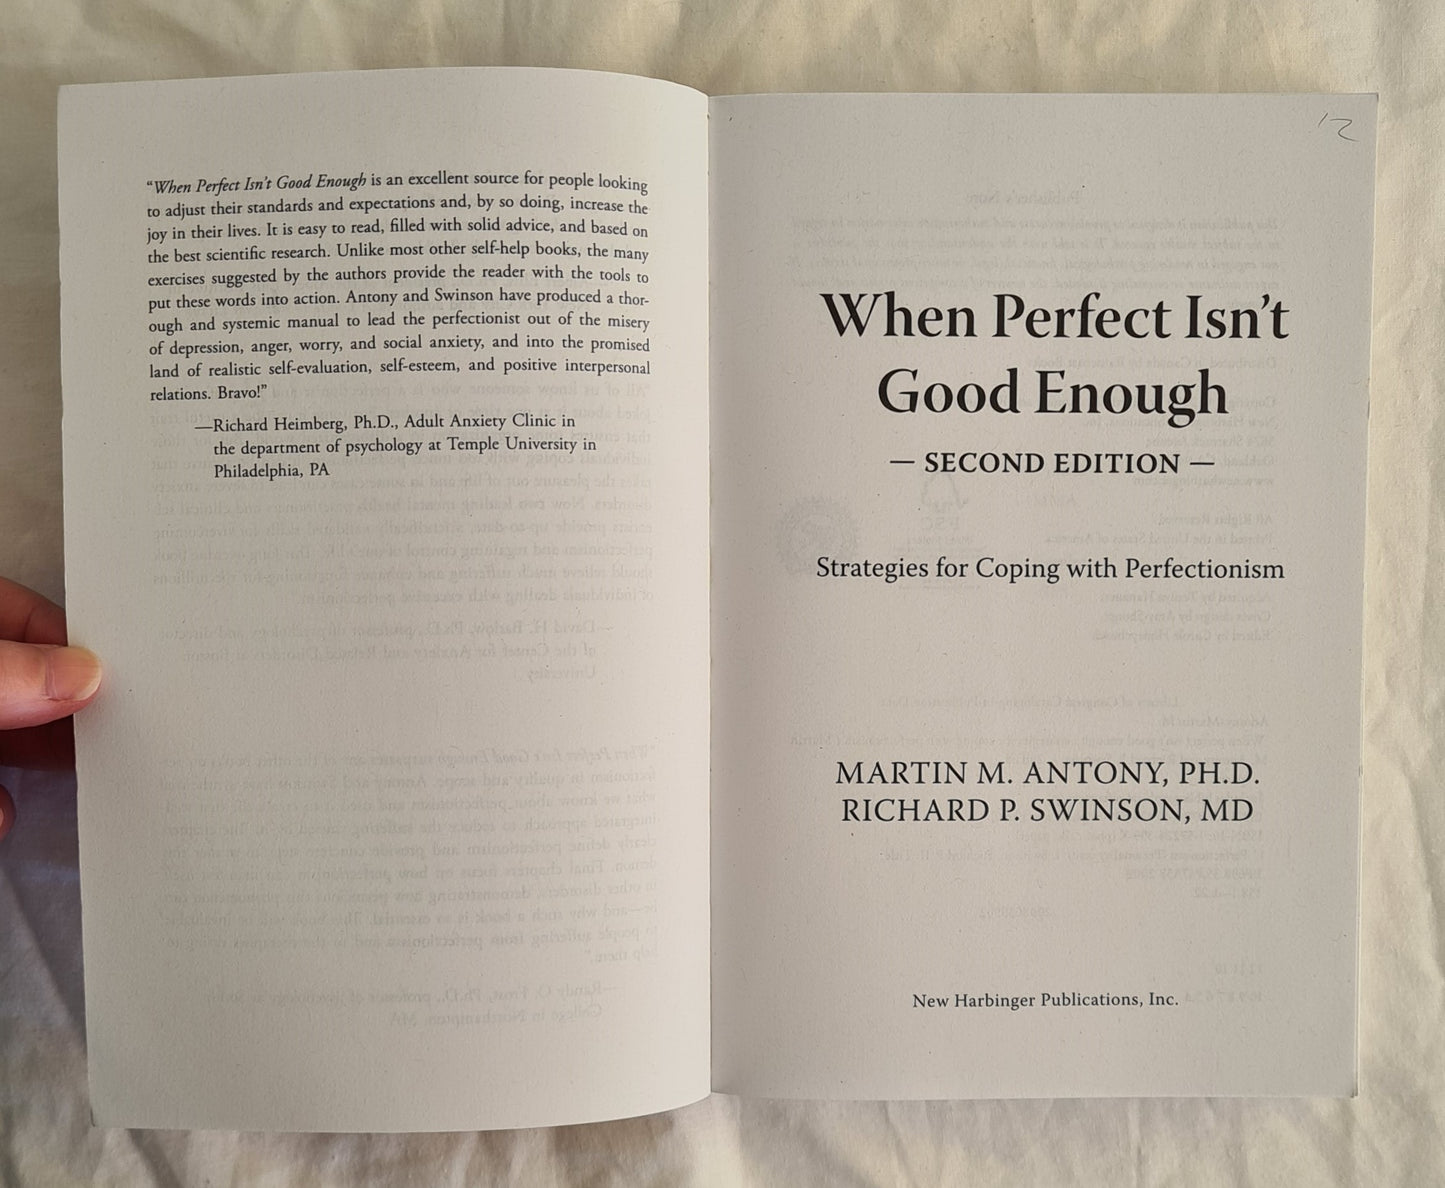 When Perfect Isn’t Good Enough by Martin M. Anthony and Richard P. Swinson